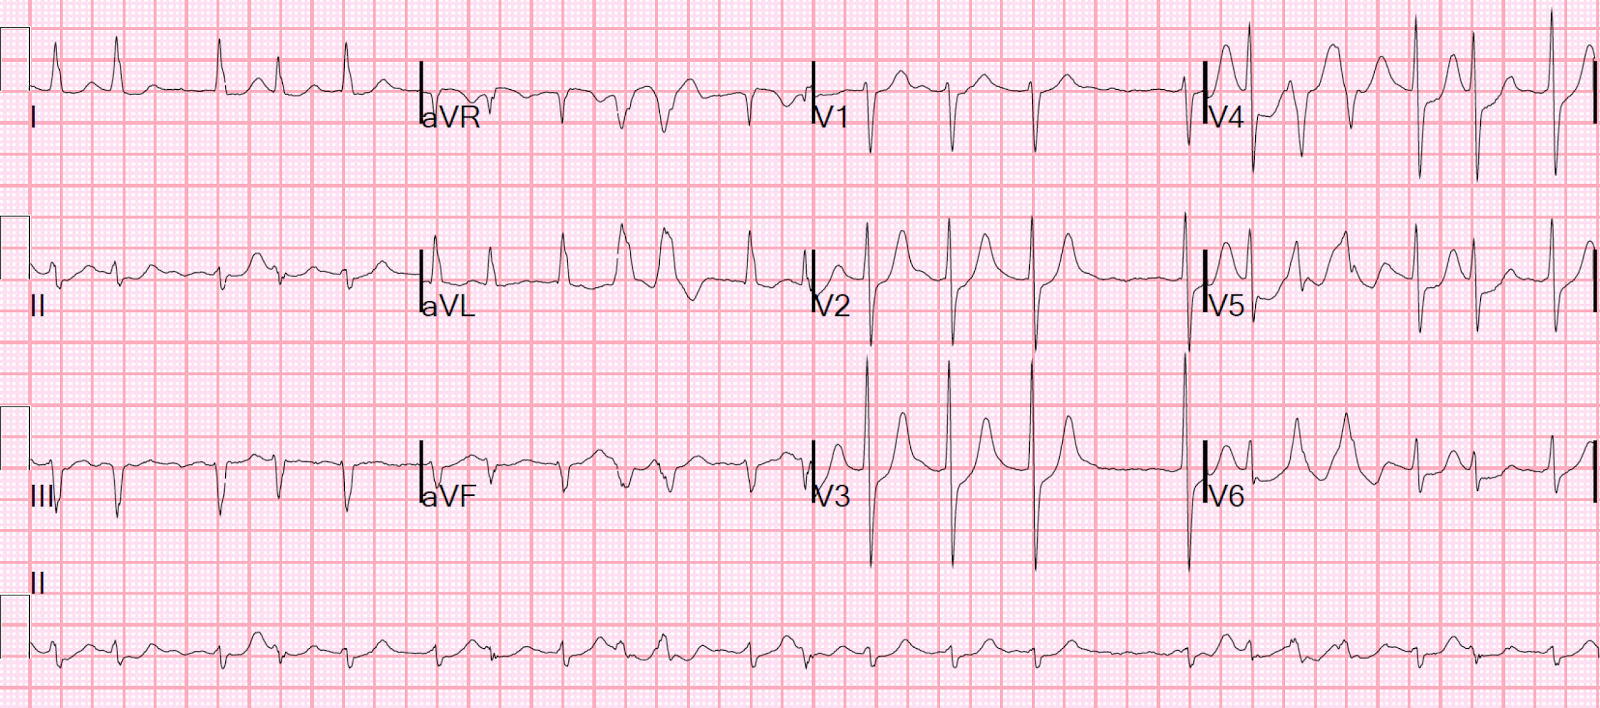 Dr. Smith's Blog: Atrial fibrillation with RVR: use to assess volume; then sinus vs. SVT: use of Lewis leads